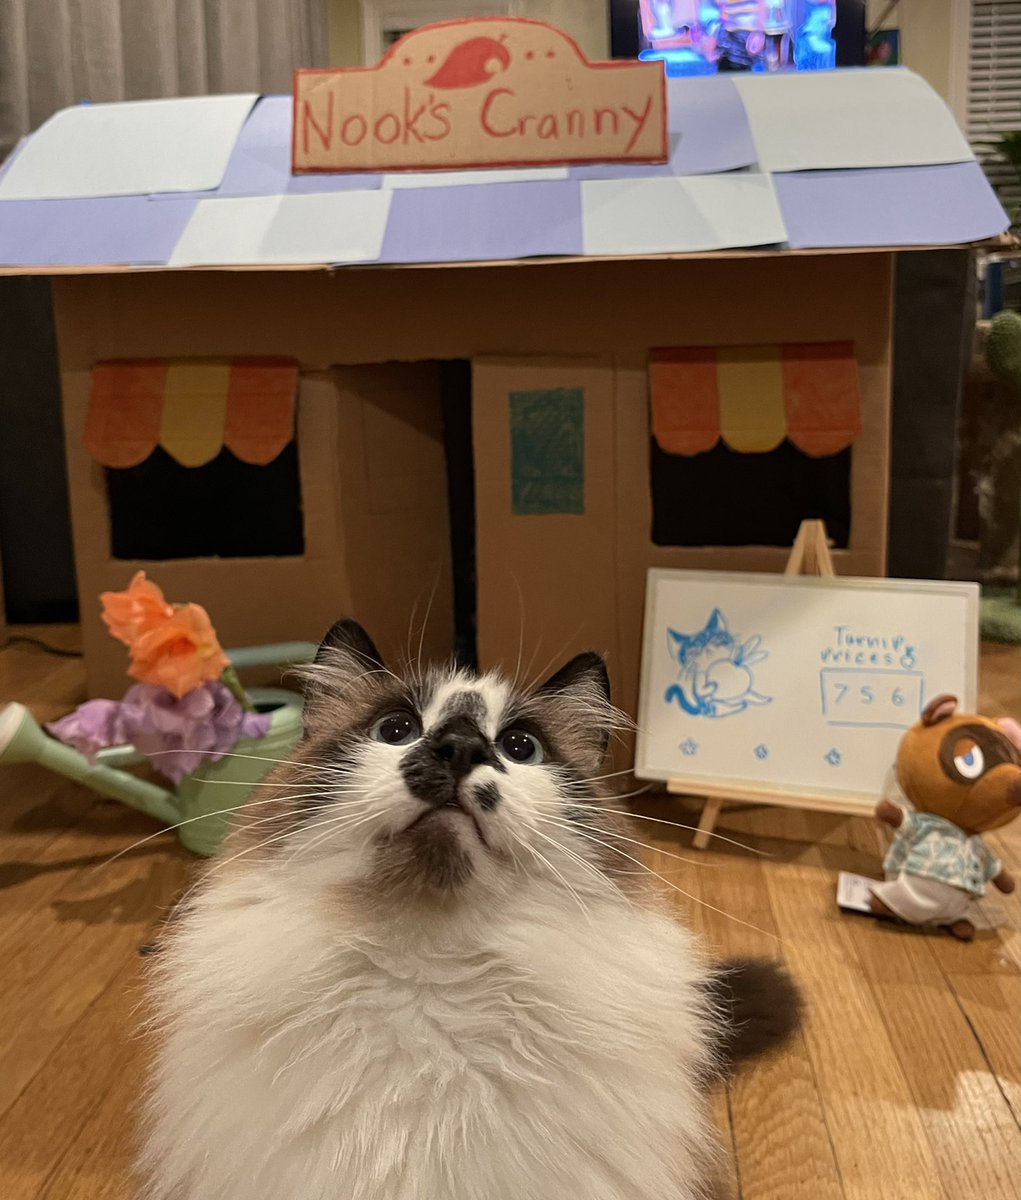 #PhotoChallenge2022April
Day 26:  #NationalKidsAndPetsDay 
We love spending time with our young hoomans. We have fun playing with them and they are so creative. Last year they made us this Animal Crossing box house! 
#CatsOfTwitter #cats #TunaTuesday